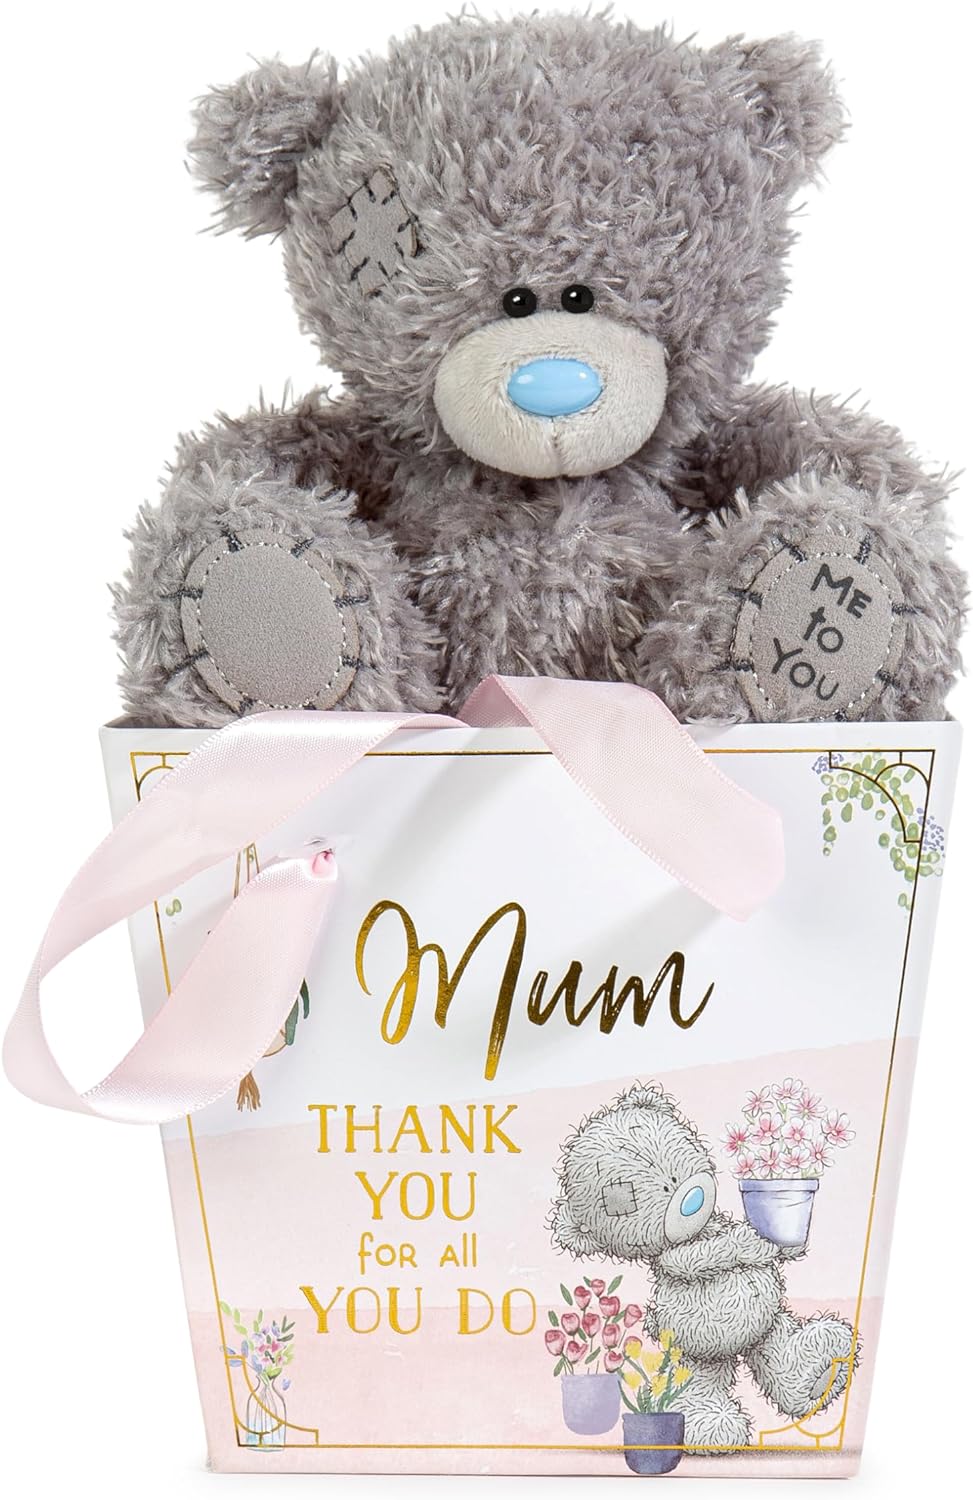 Me to You 'Thank You Mum' Plush Bear in a Bag 13cm High Anytime Gift For Mum